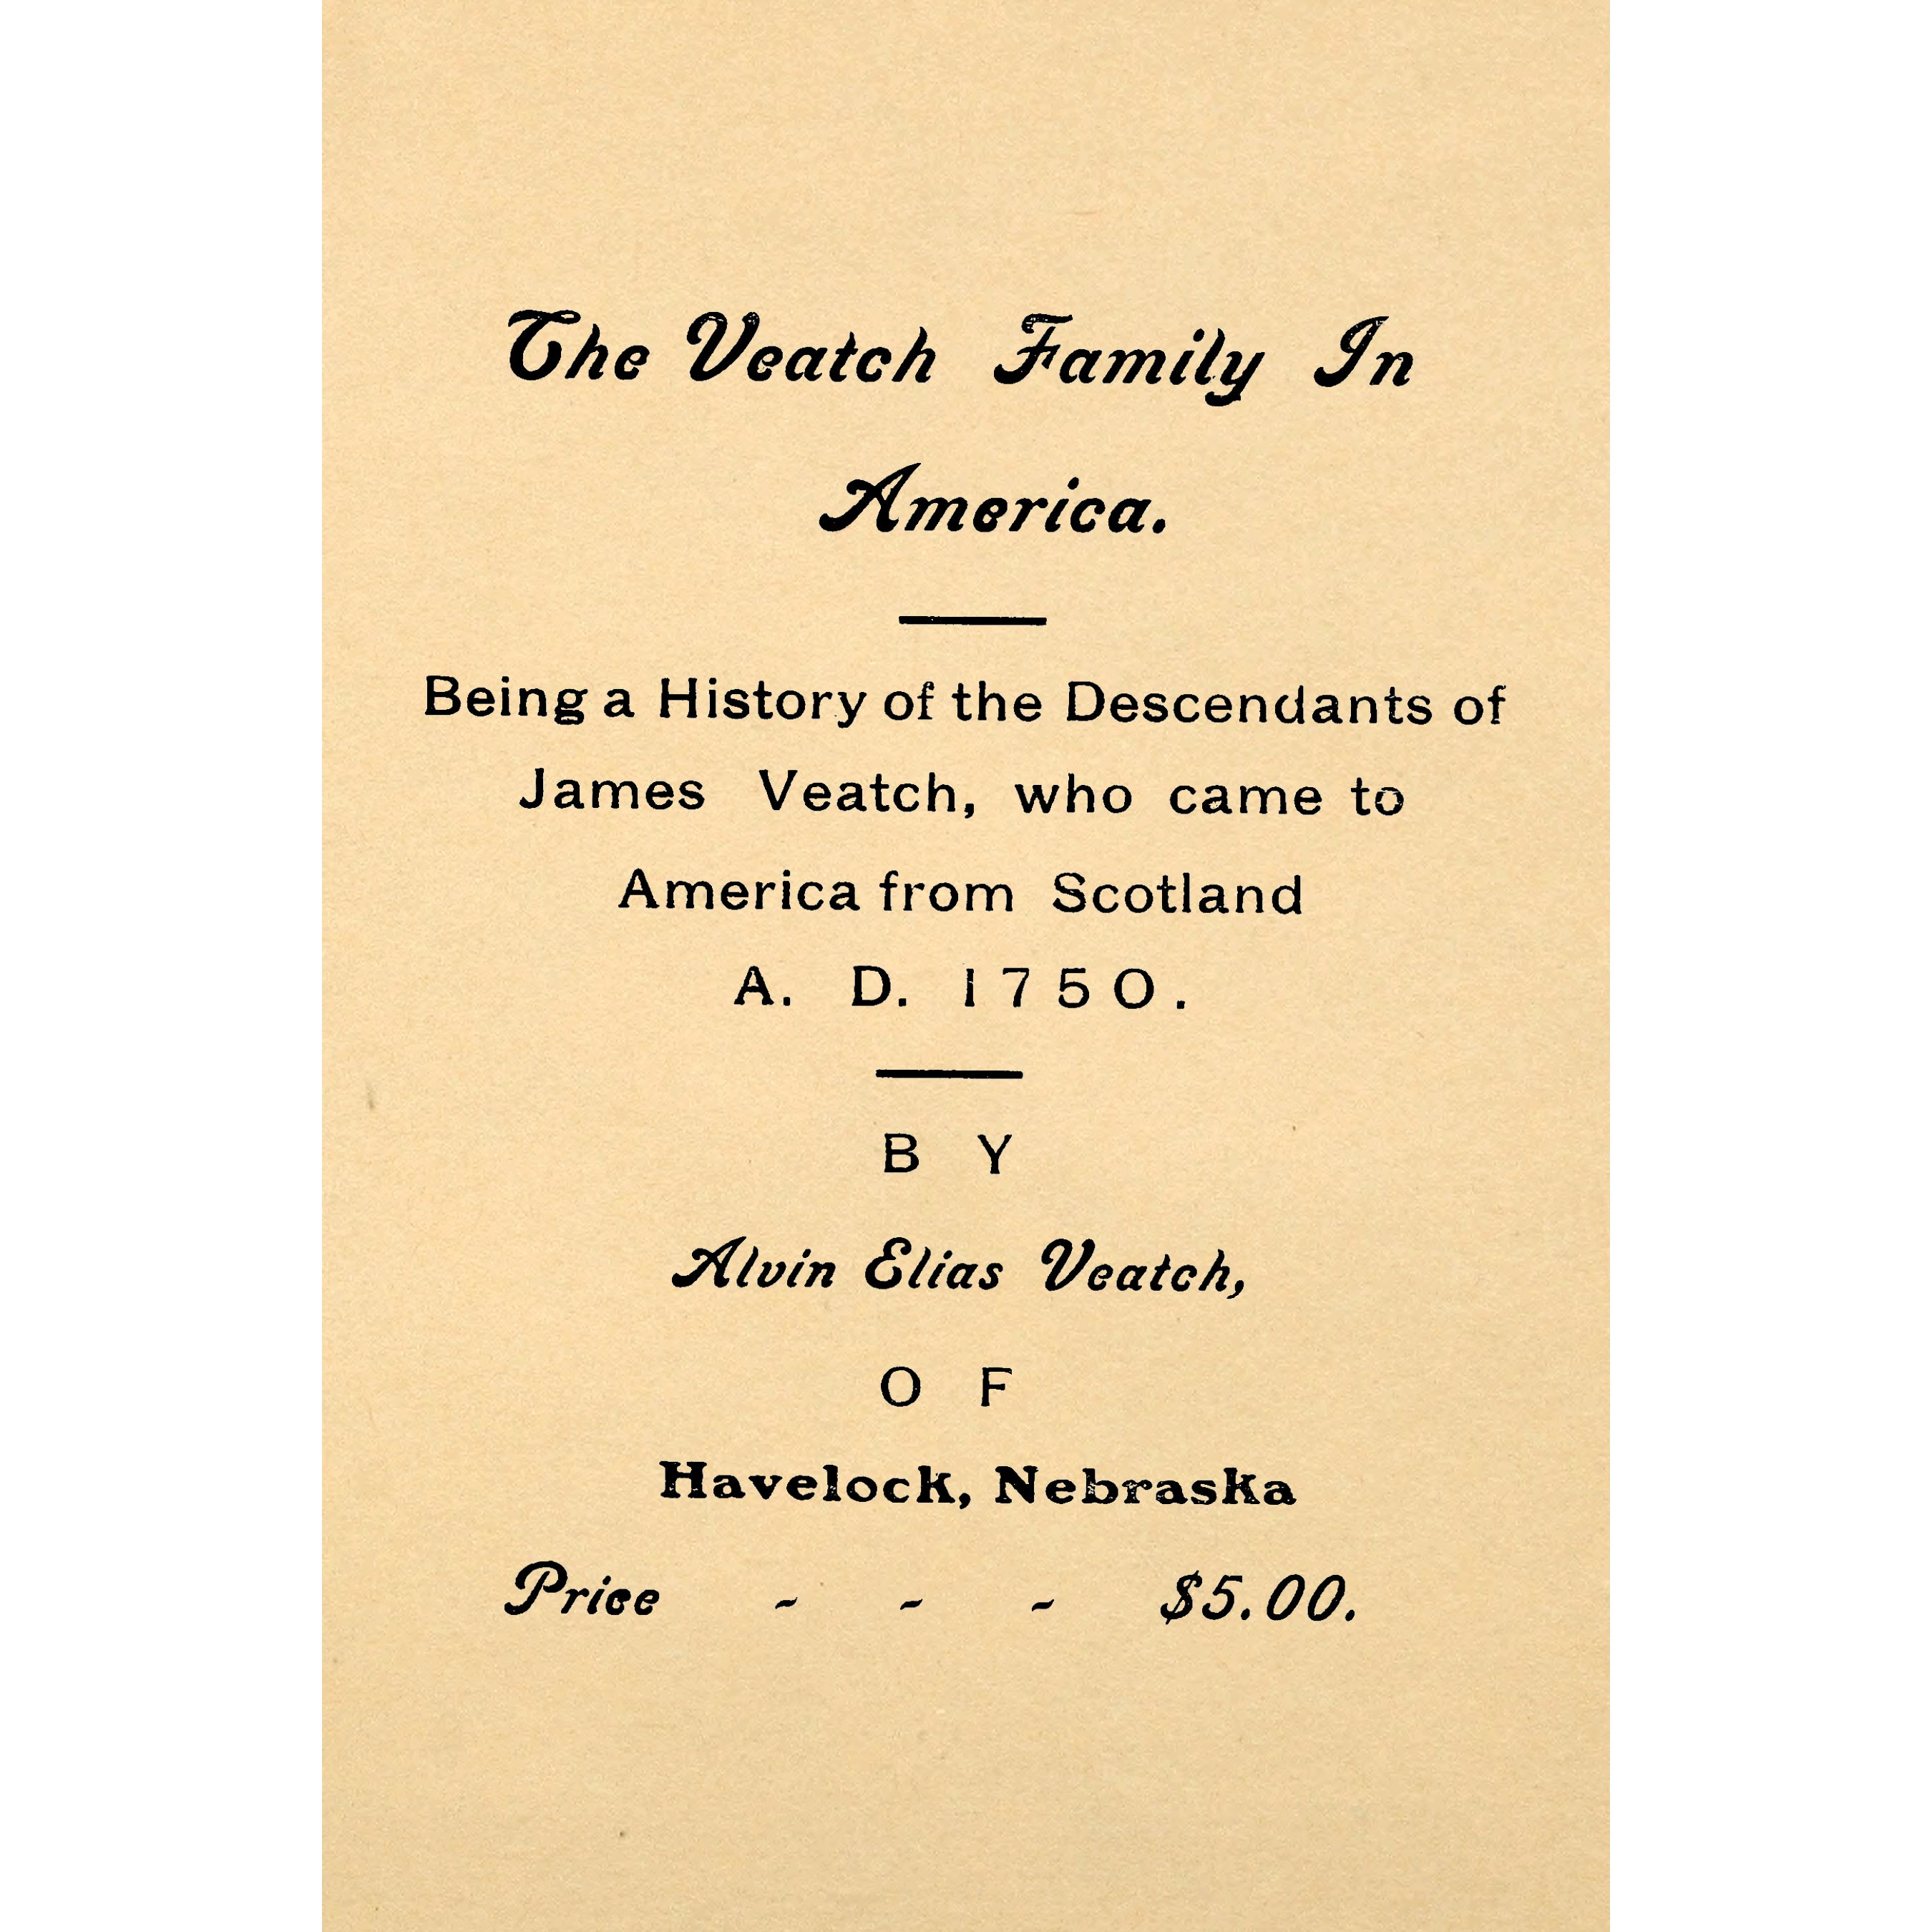 The Veatch Family In America